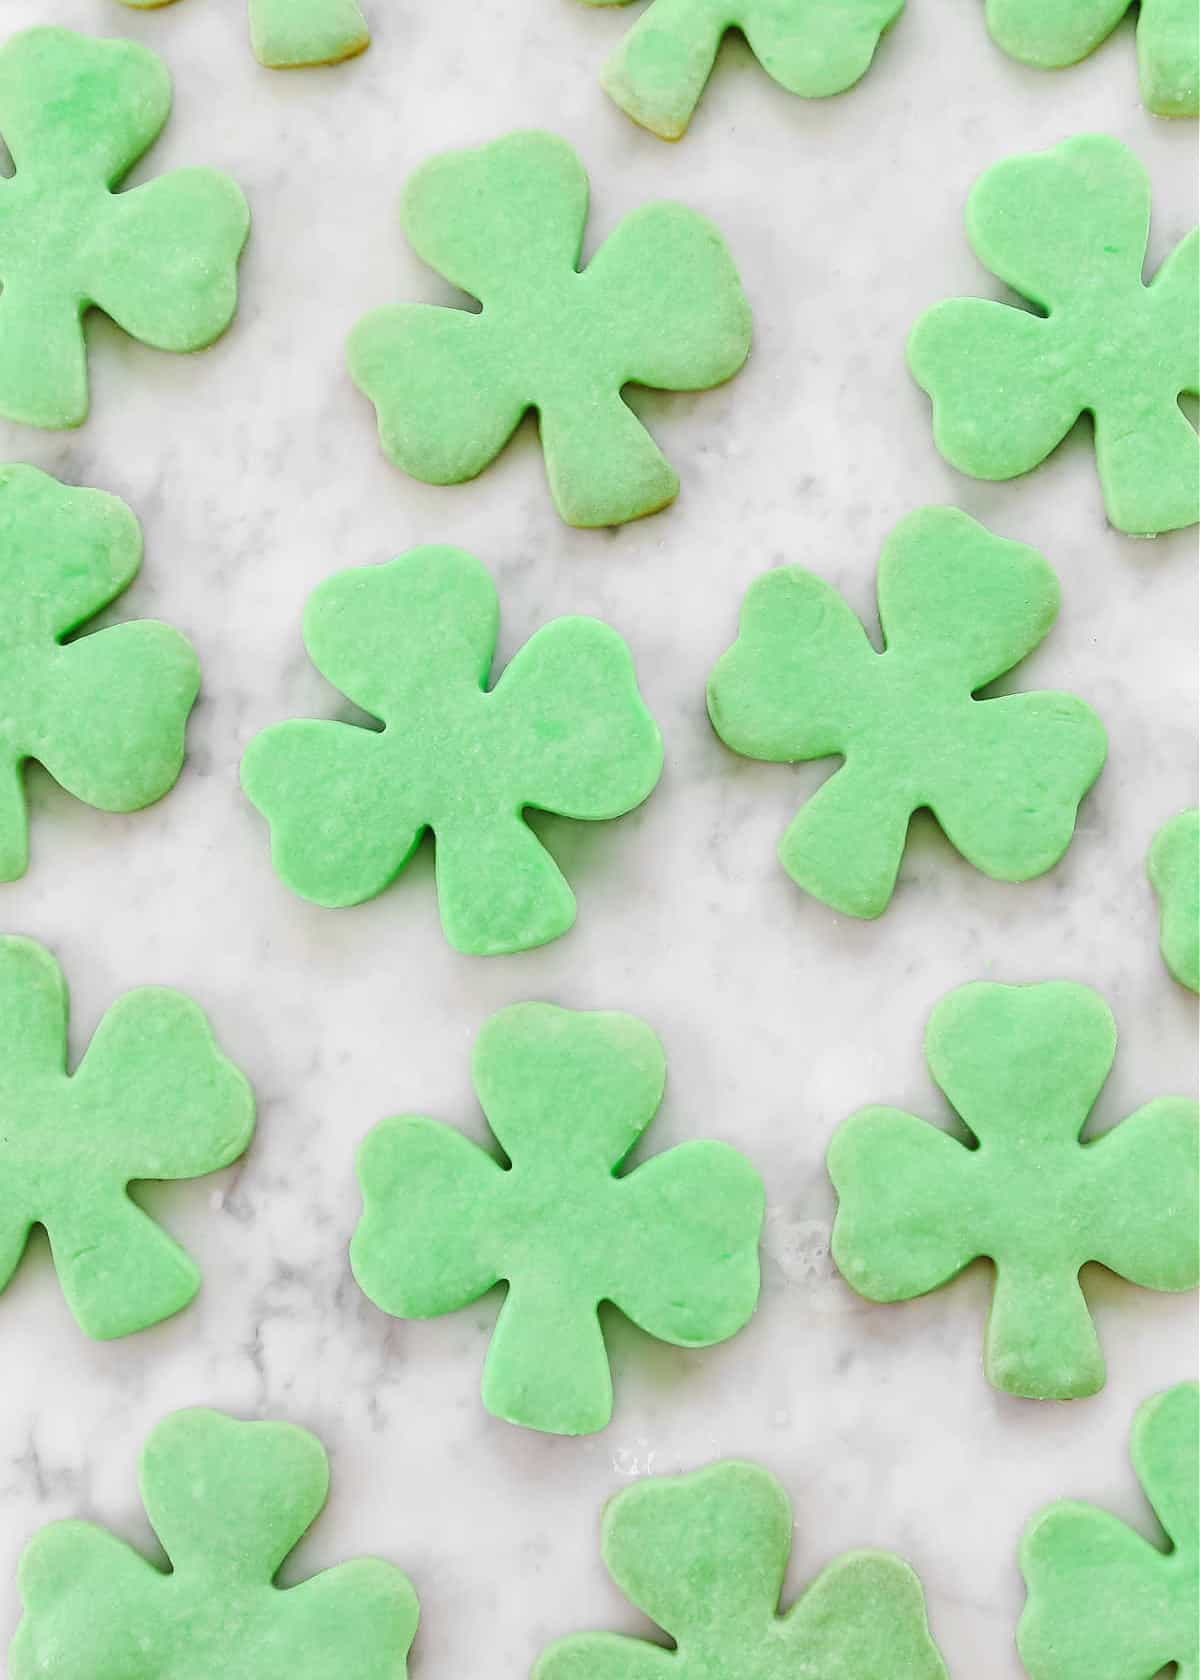 green shamrock shaped cookies on marble.